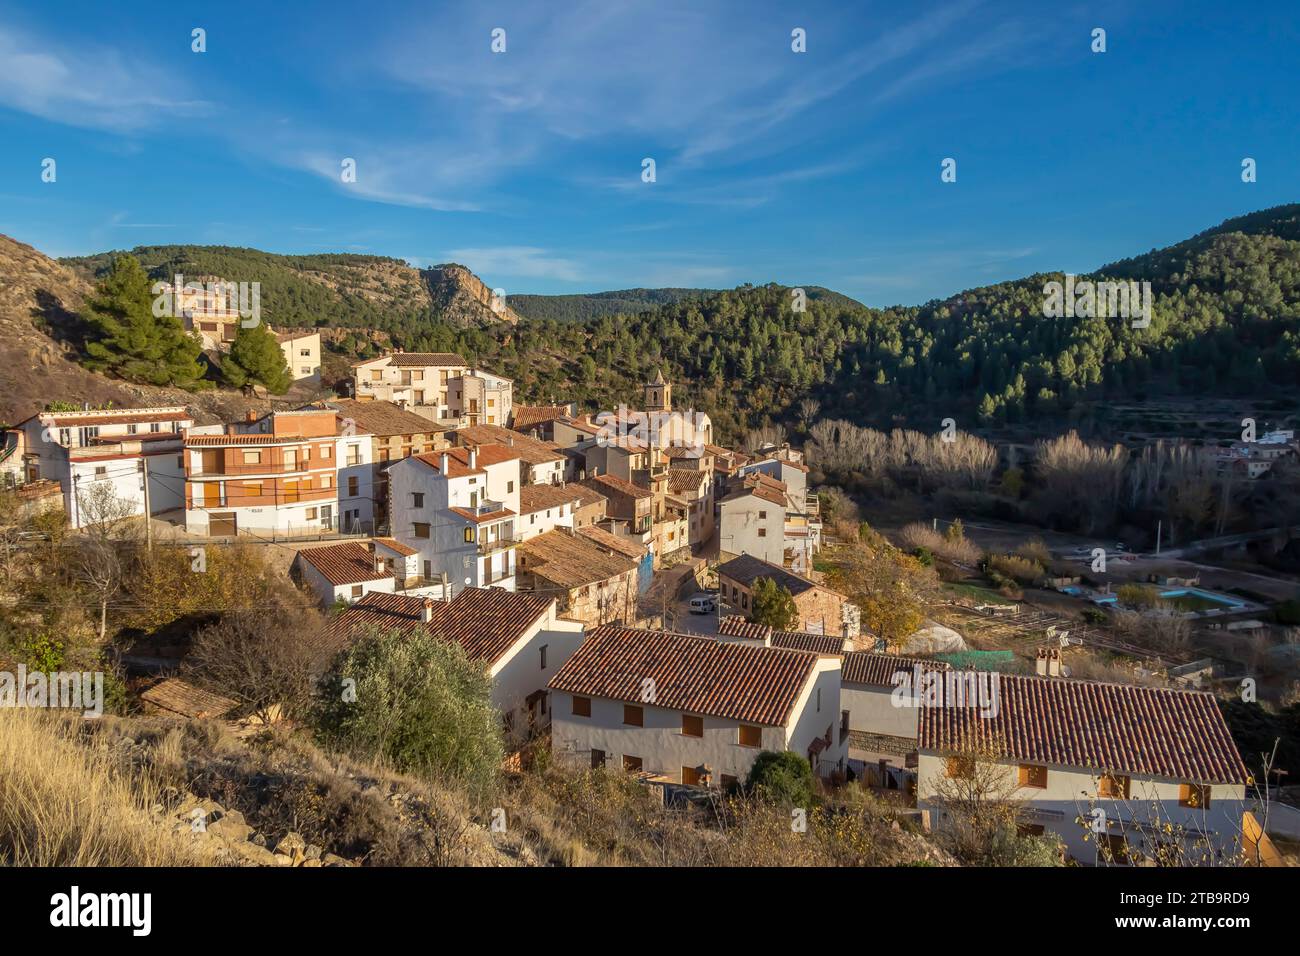 Olba is a small town in Teruel province, Spain. Stock Photo